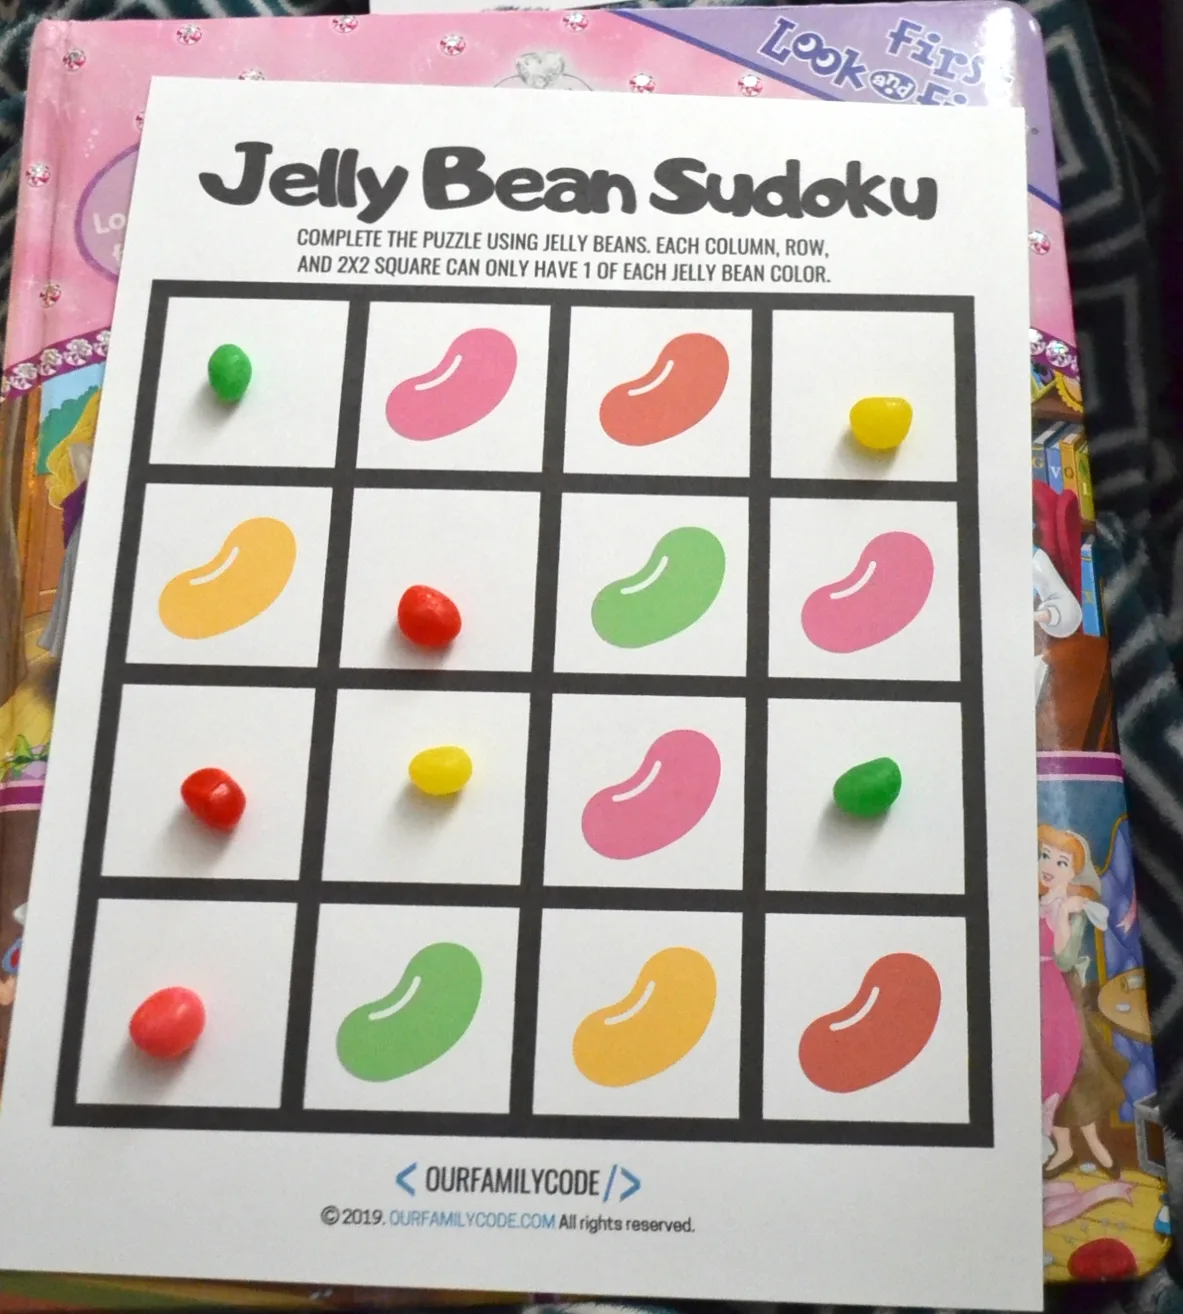 A picture of jelly beans on a jelly bean sudoku worksheet.